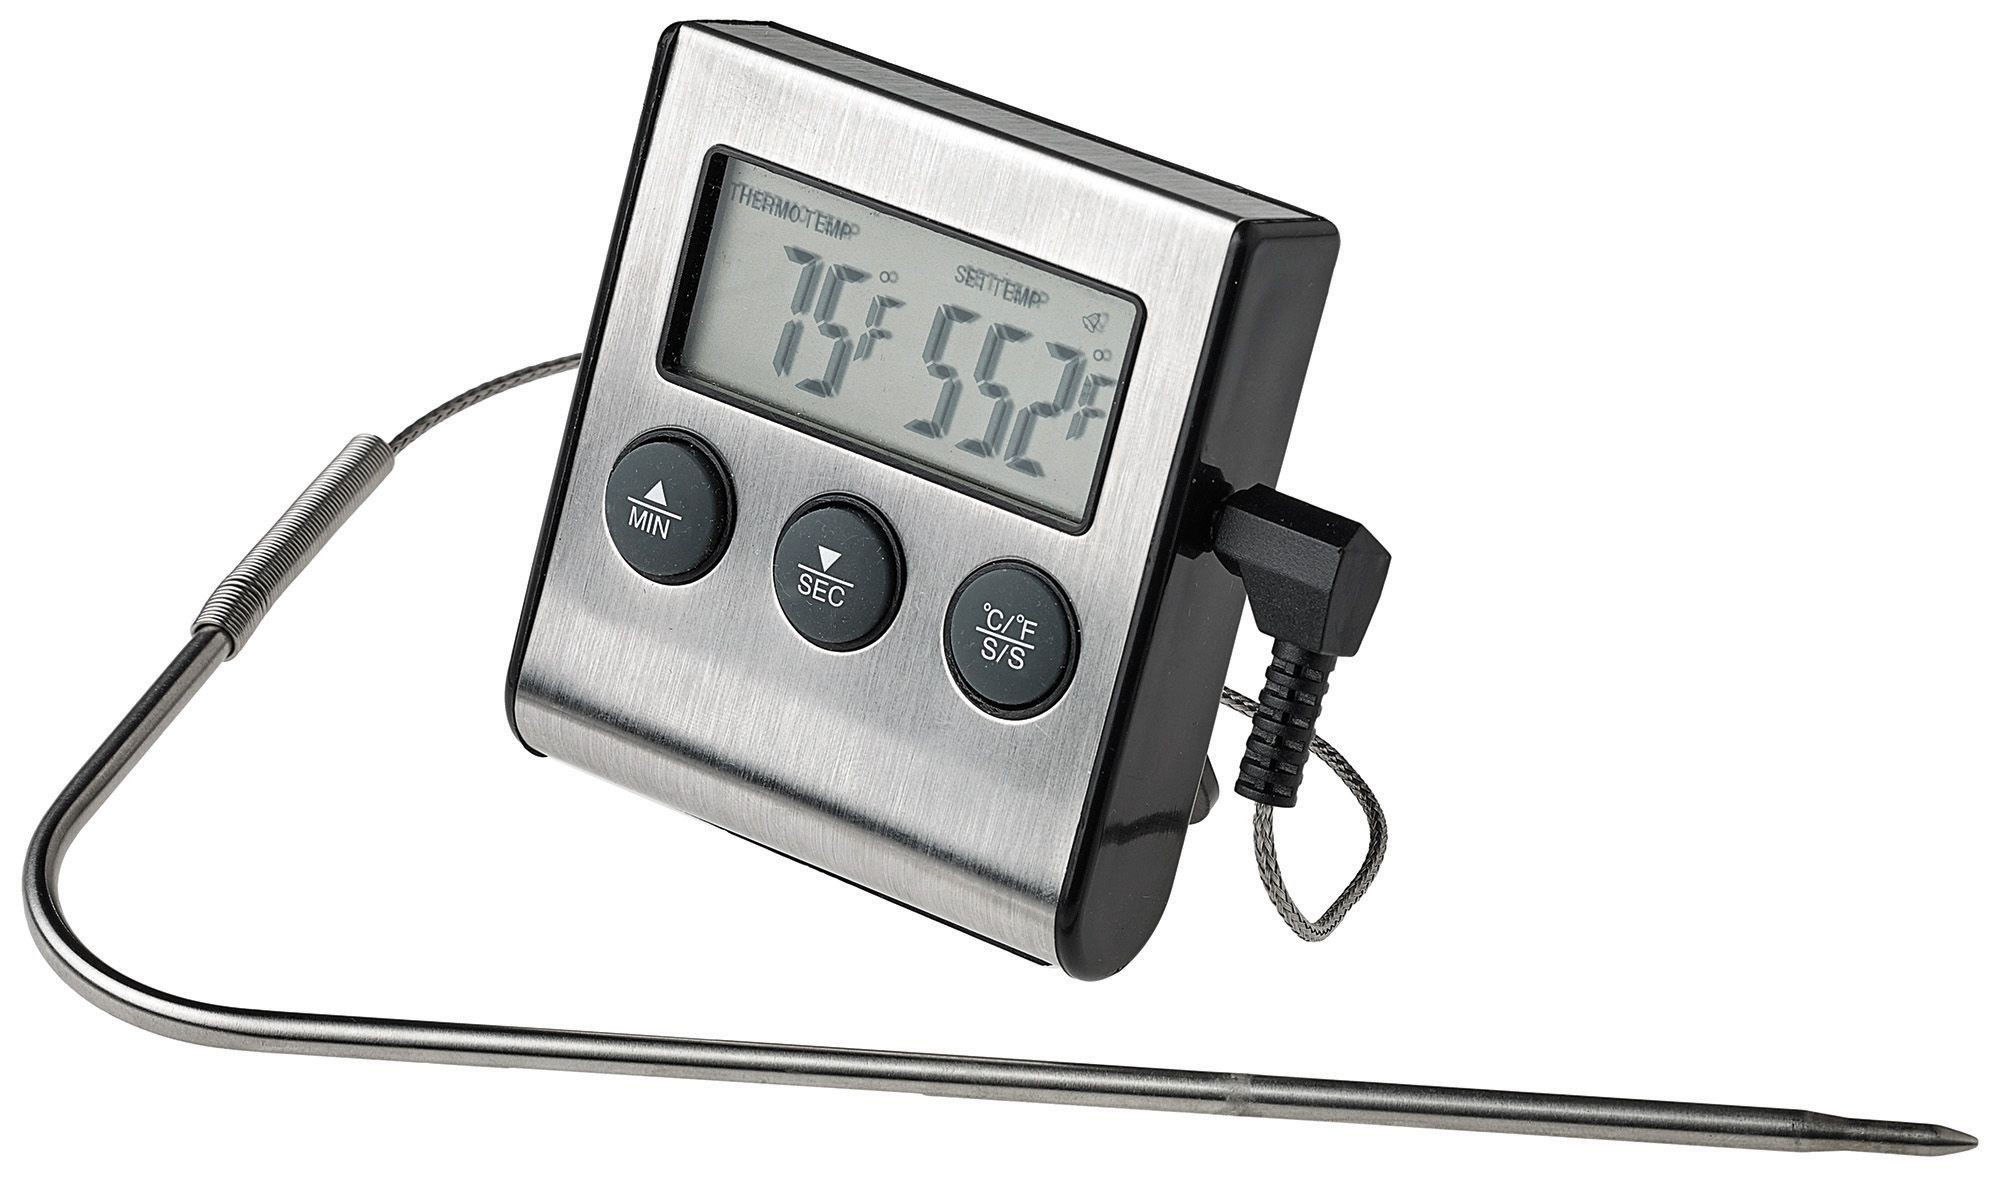 Winco TMT-DG6 Digital Roasting Thermometer with Timer and Probe - LionsDeal